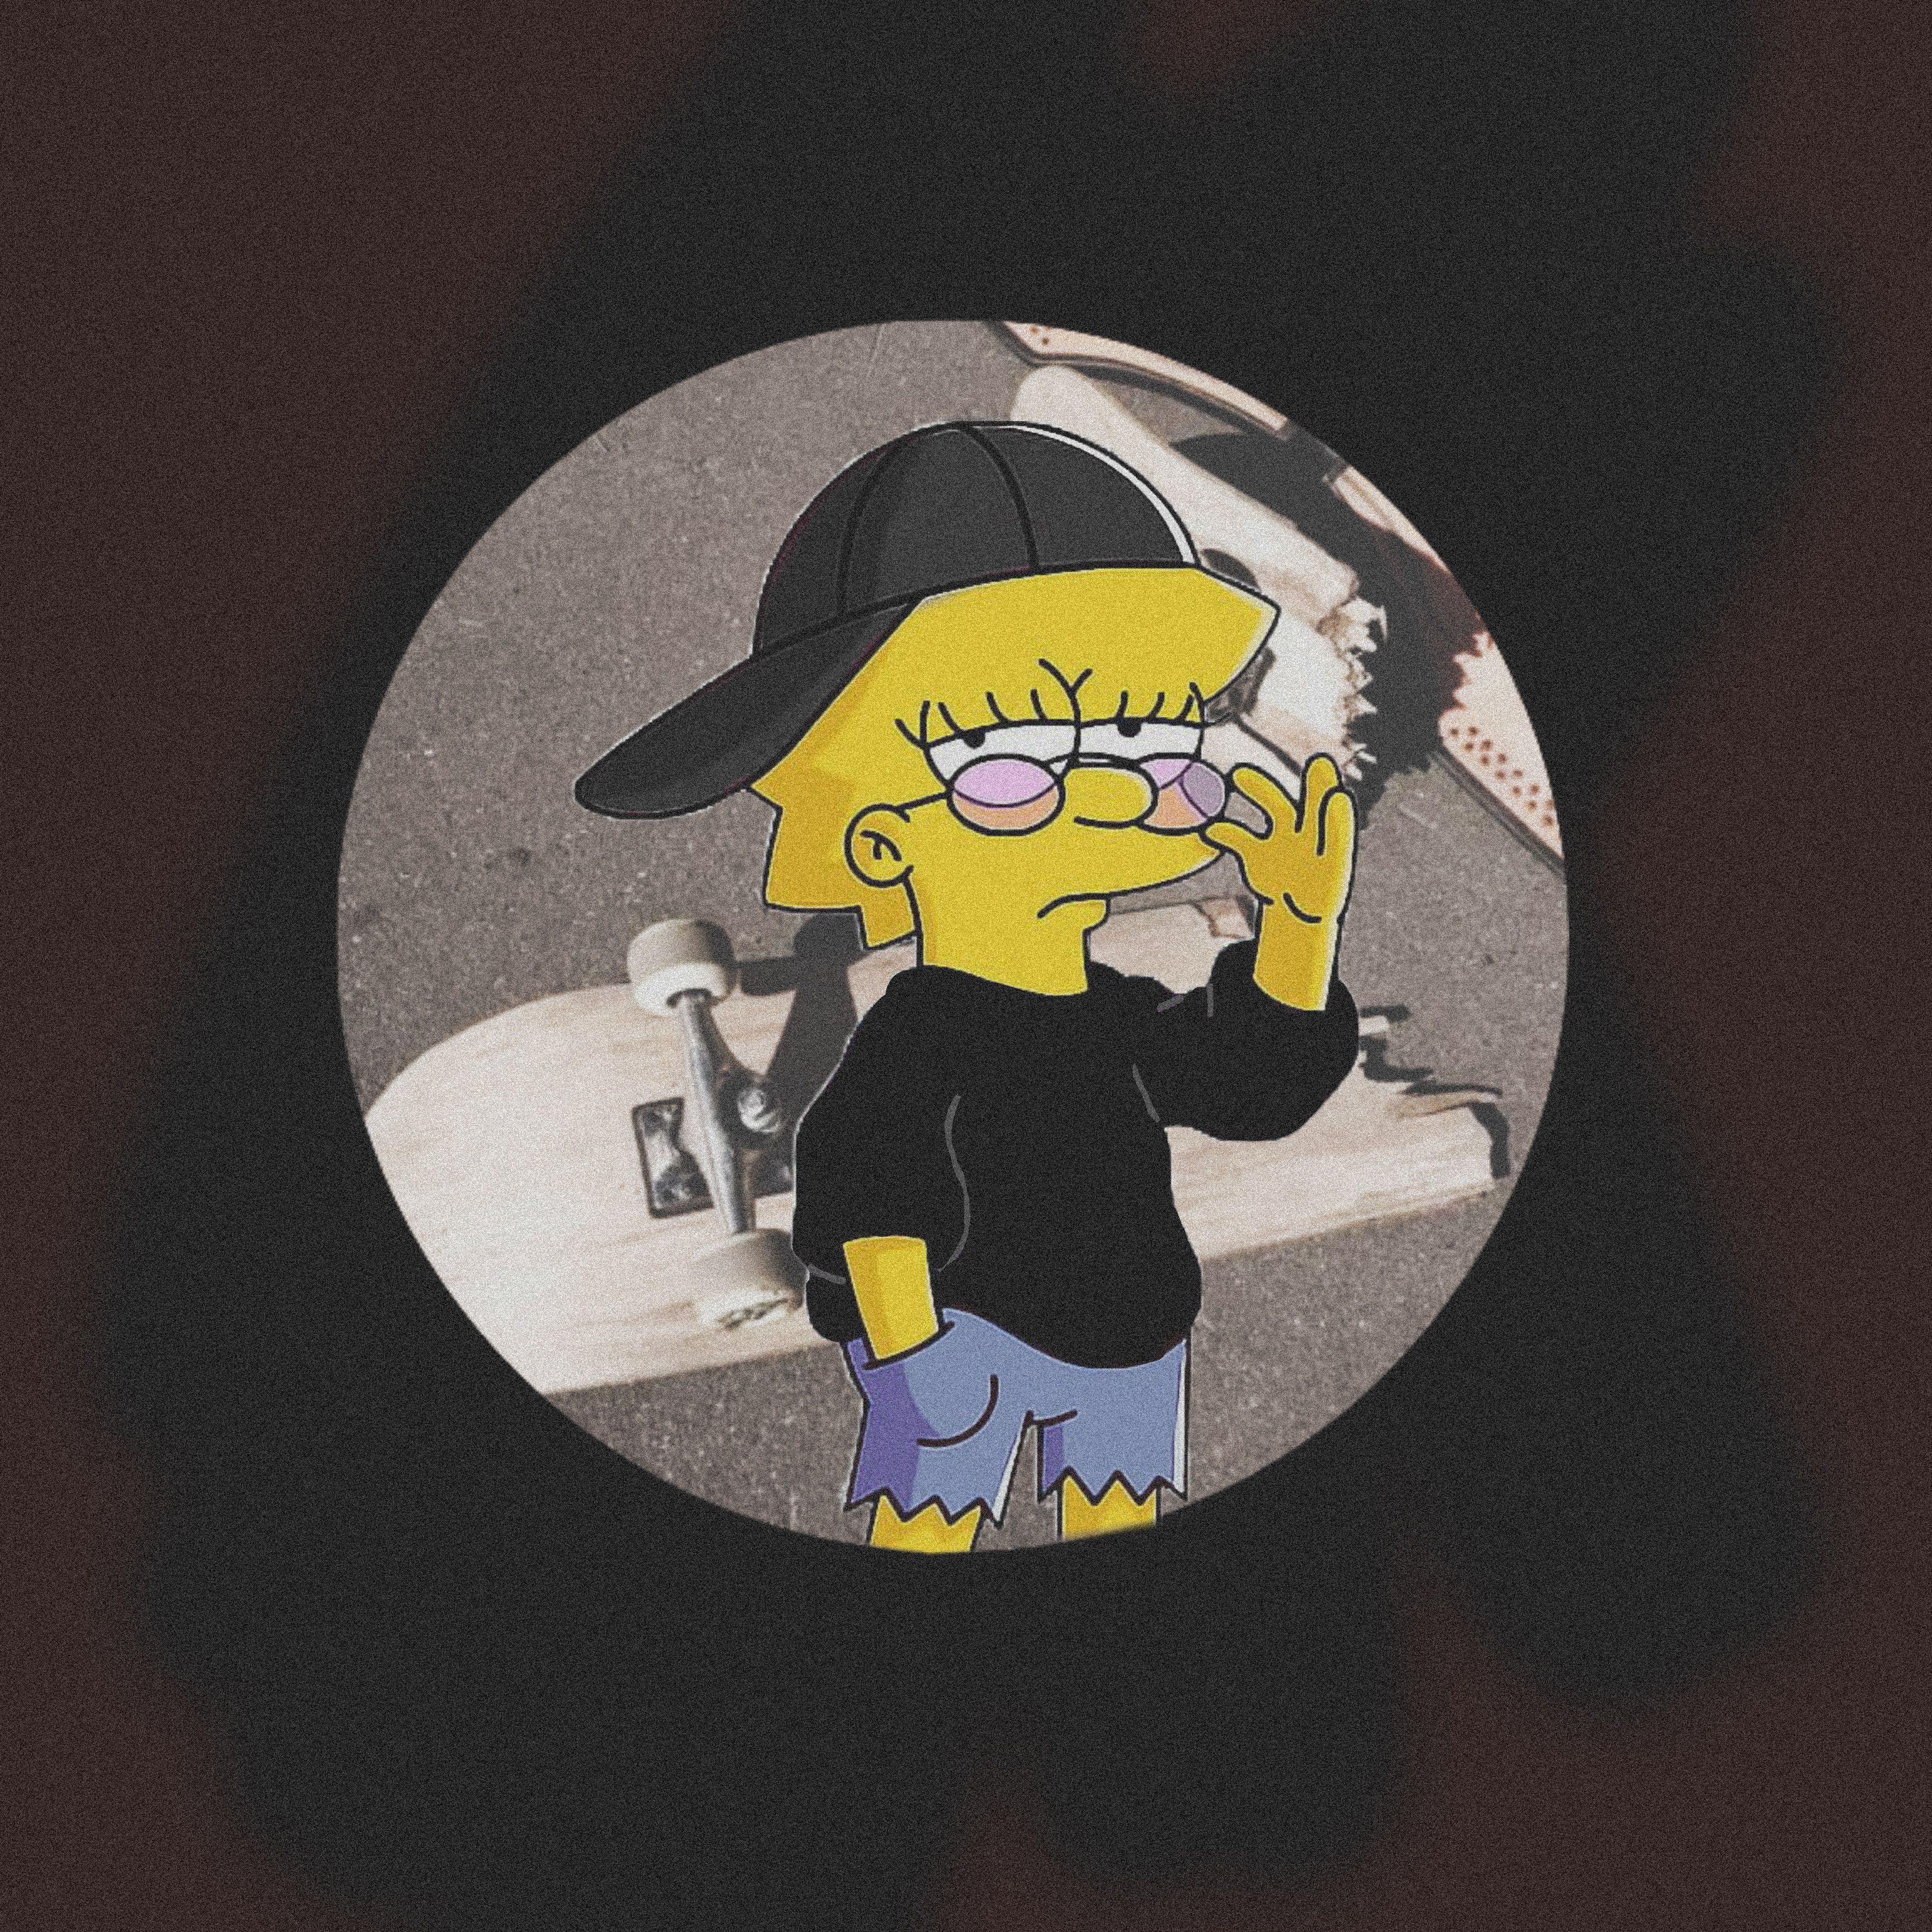 A cartoon character is standing next to his skateboard - Lisa Simpson, The Simpsons